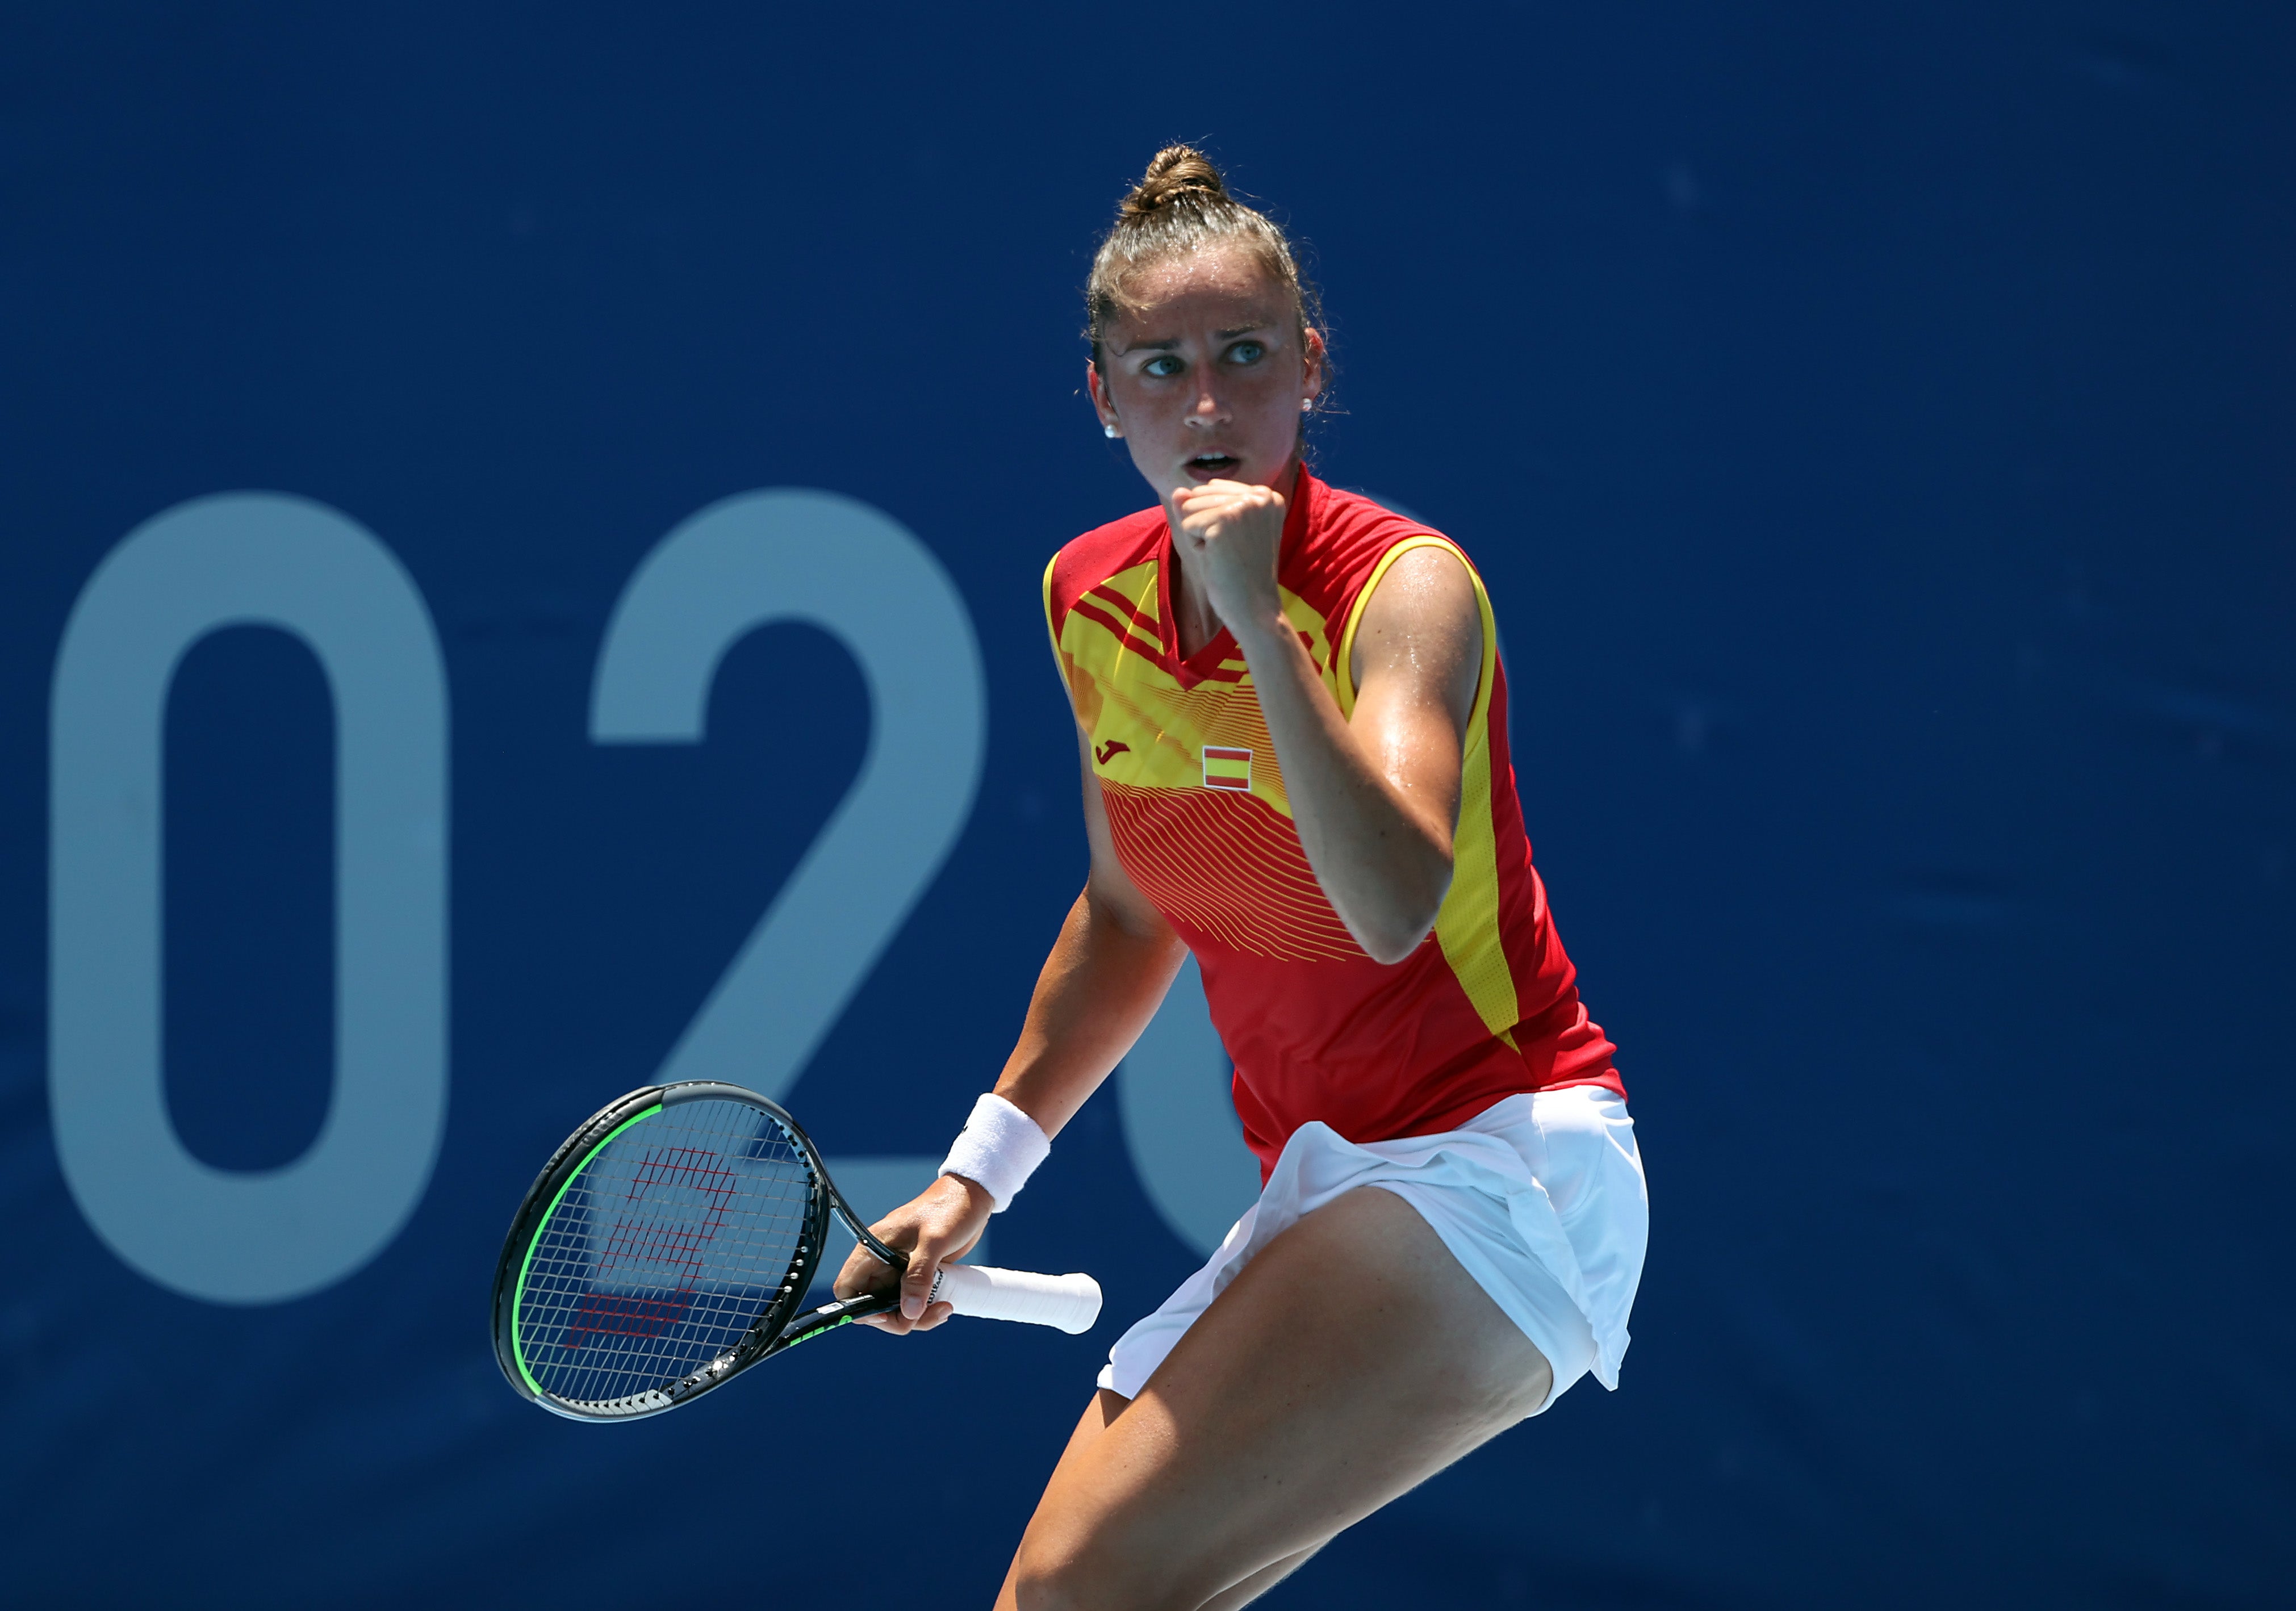 Sara Sorribes Tormo of Team Spain celebrates after a point during her Women's Singles First Round match against Ashleigh Barty of Team Australia on day two of the Tokyo 2020 Olympic Games at Ariake Tennis Park on 25 July 2021 in Tokyo, Japan.